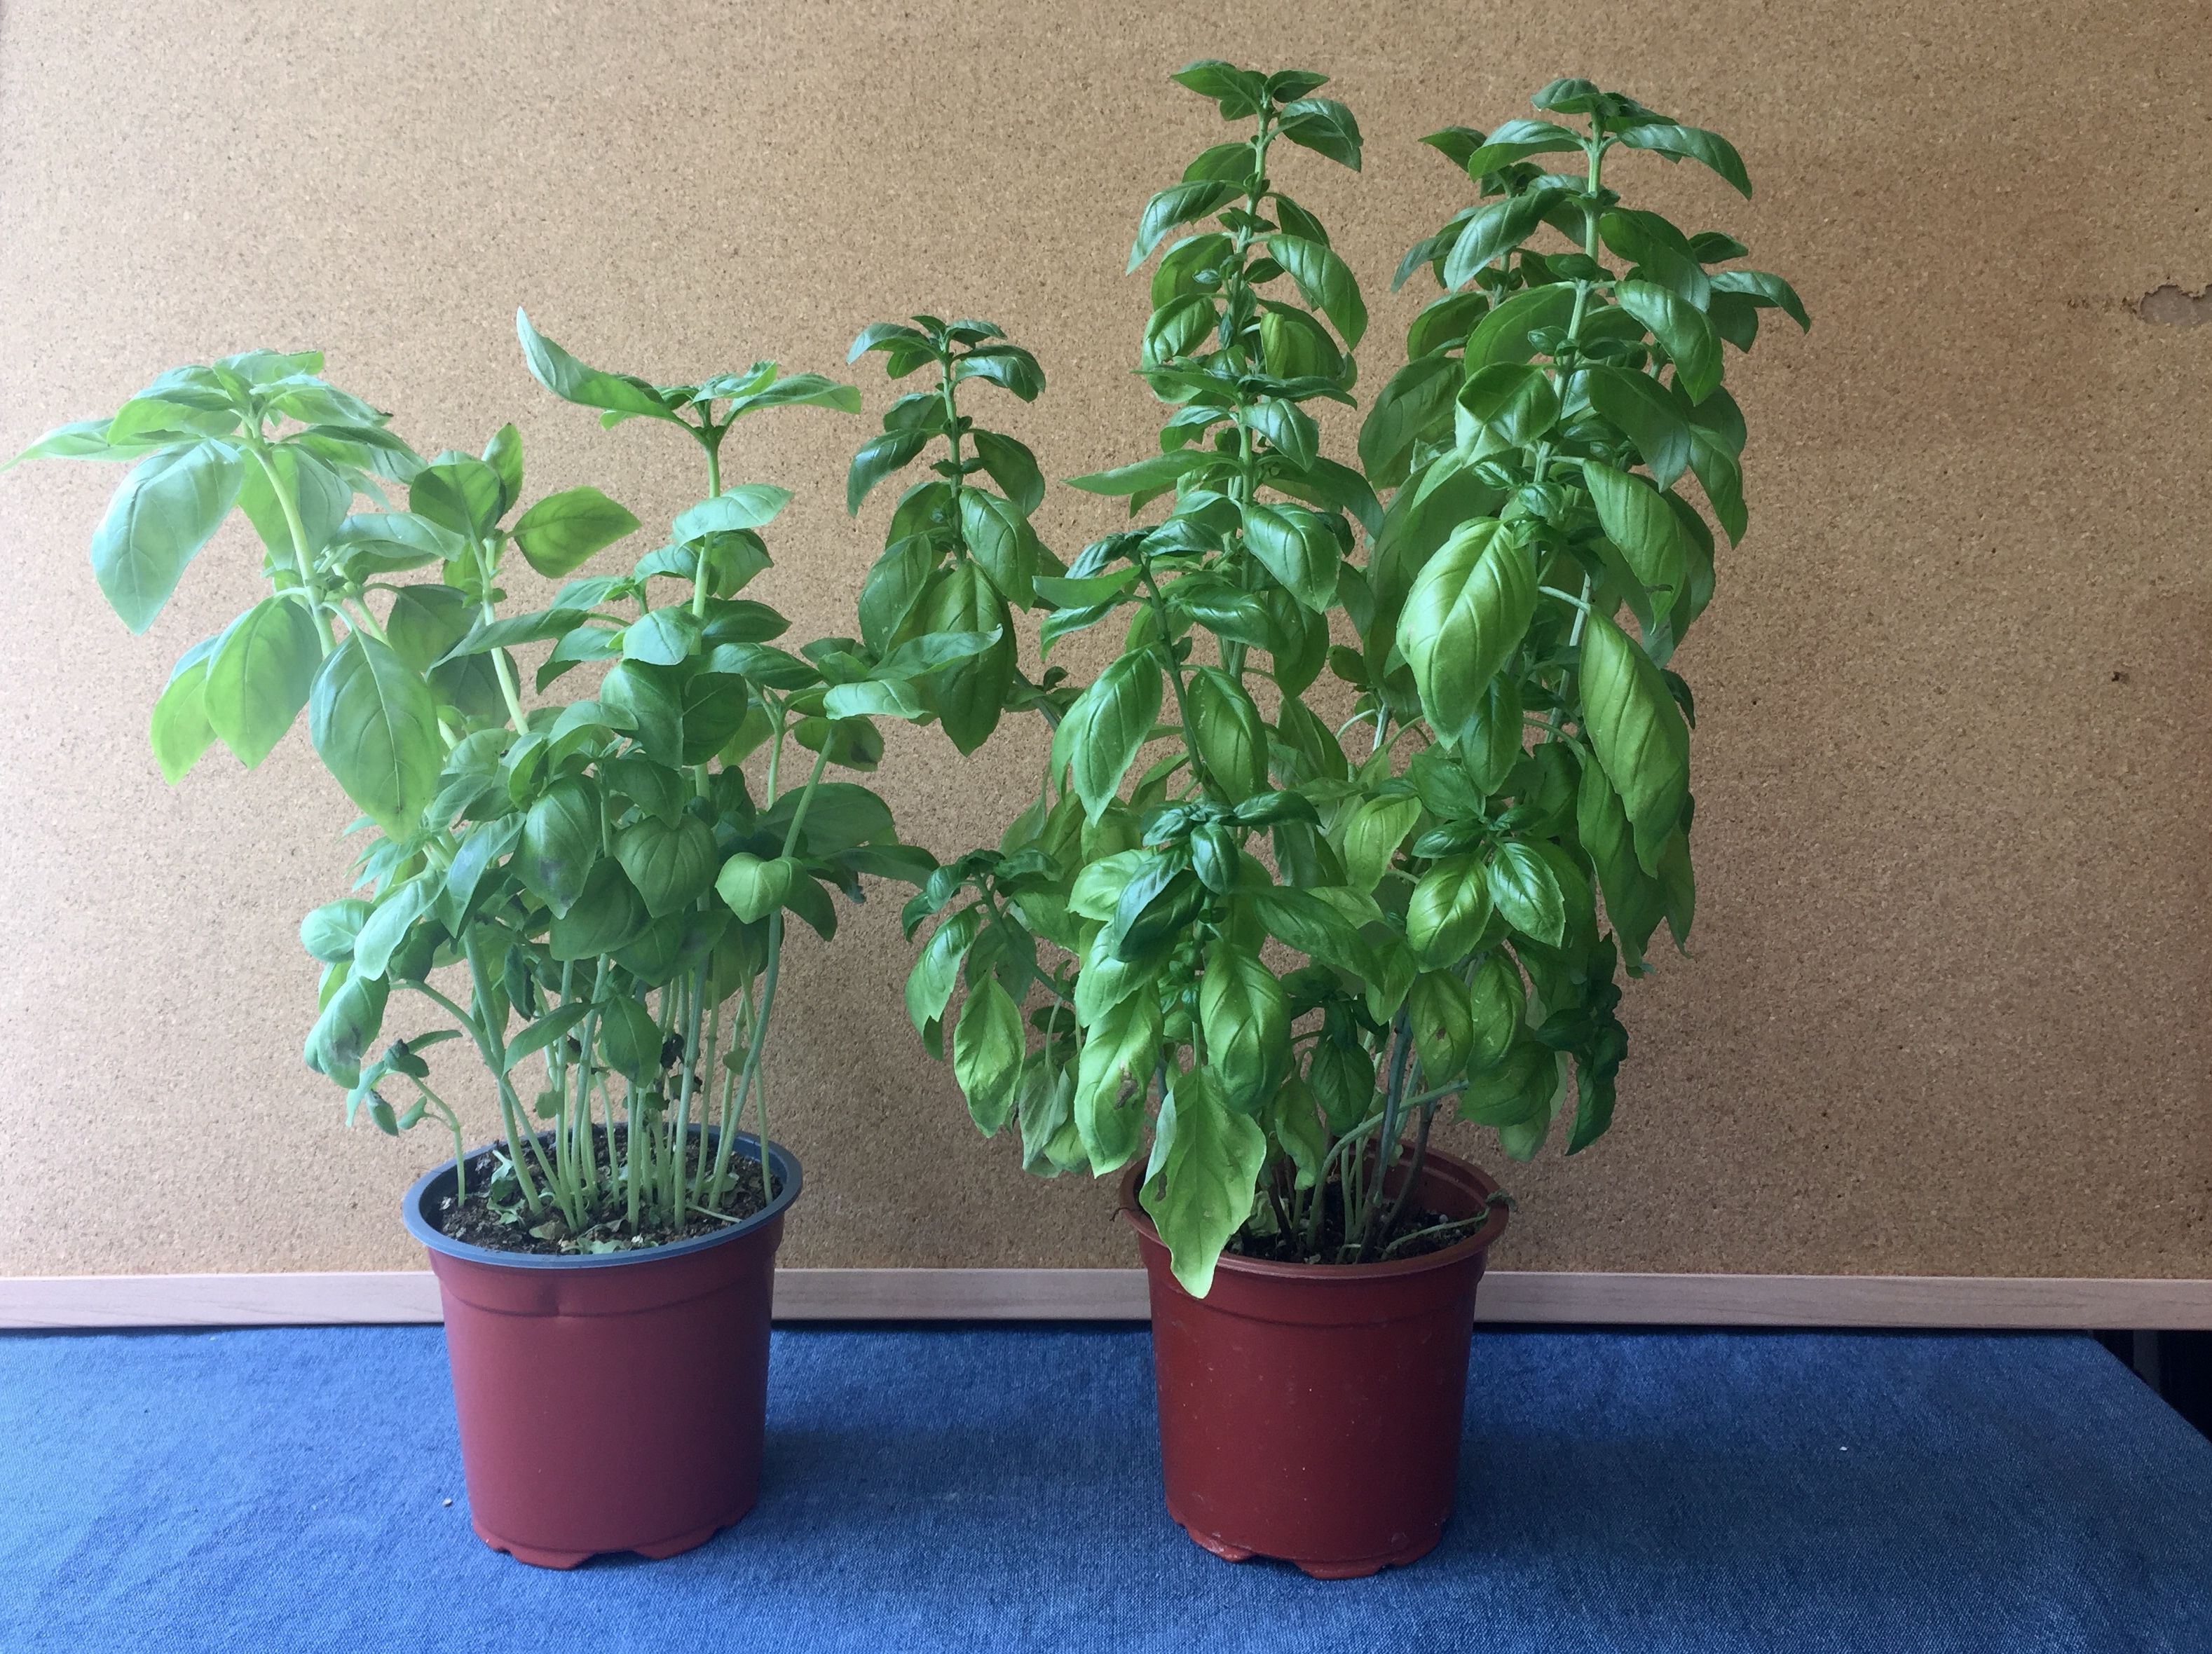 Two basil plants in small pots next to each other. The plant on the right is slightly larger than the plant on the left.